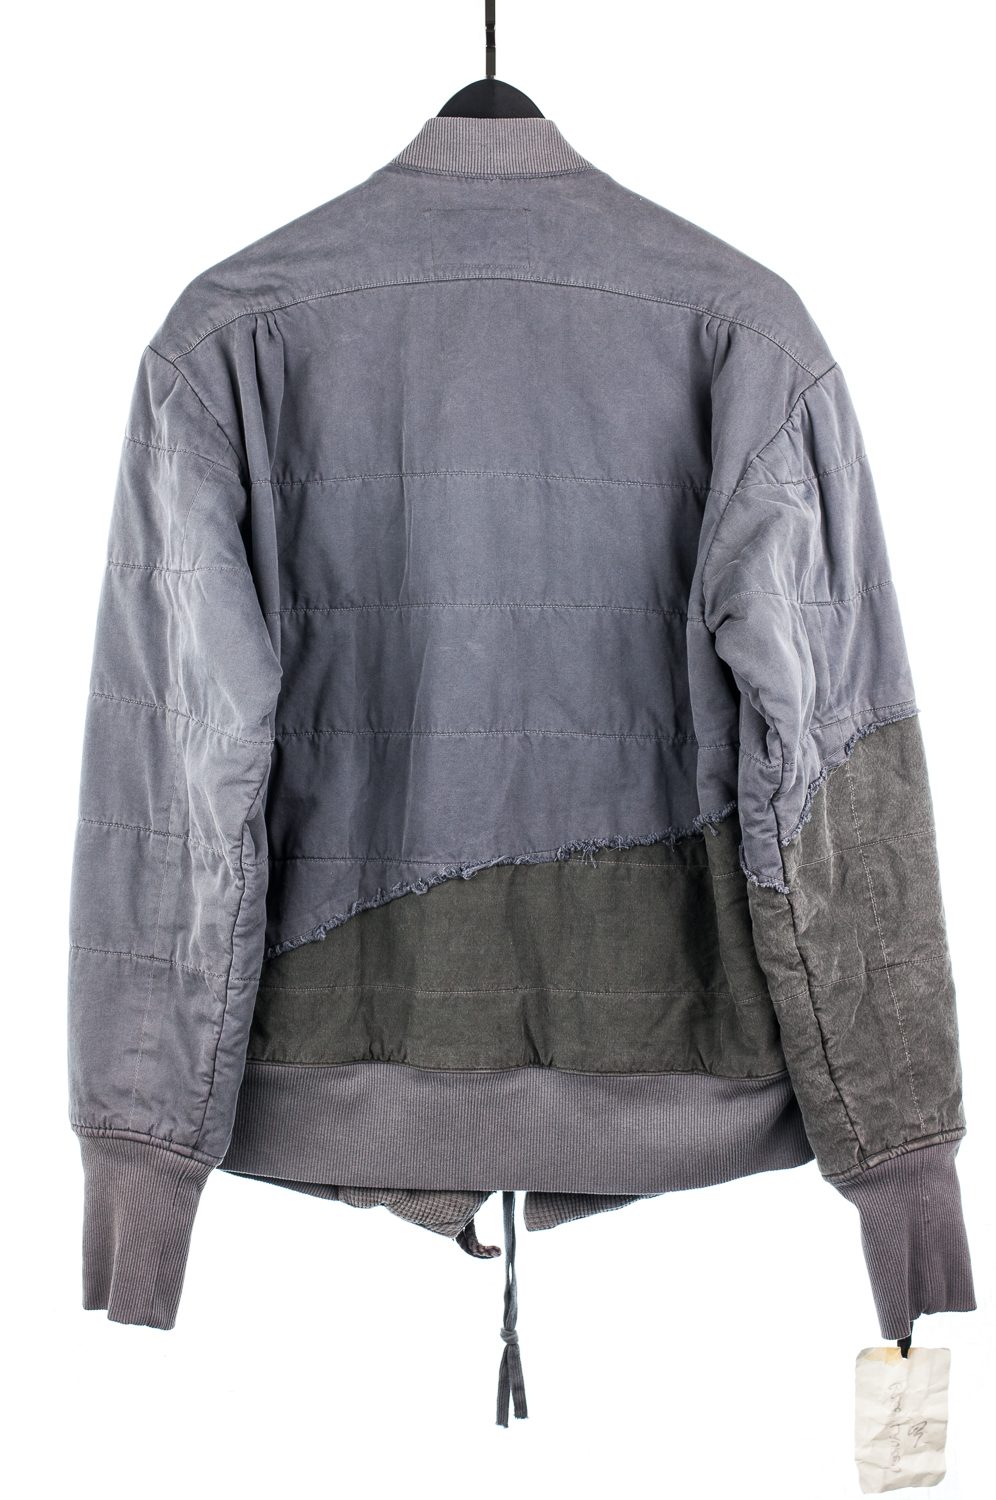 SS17 50/50 Army Tent Bomber